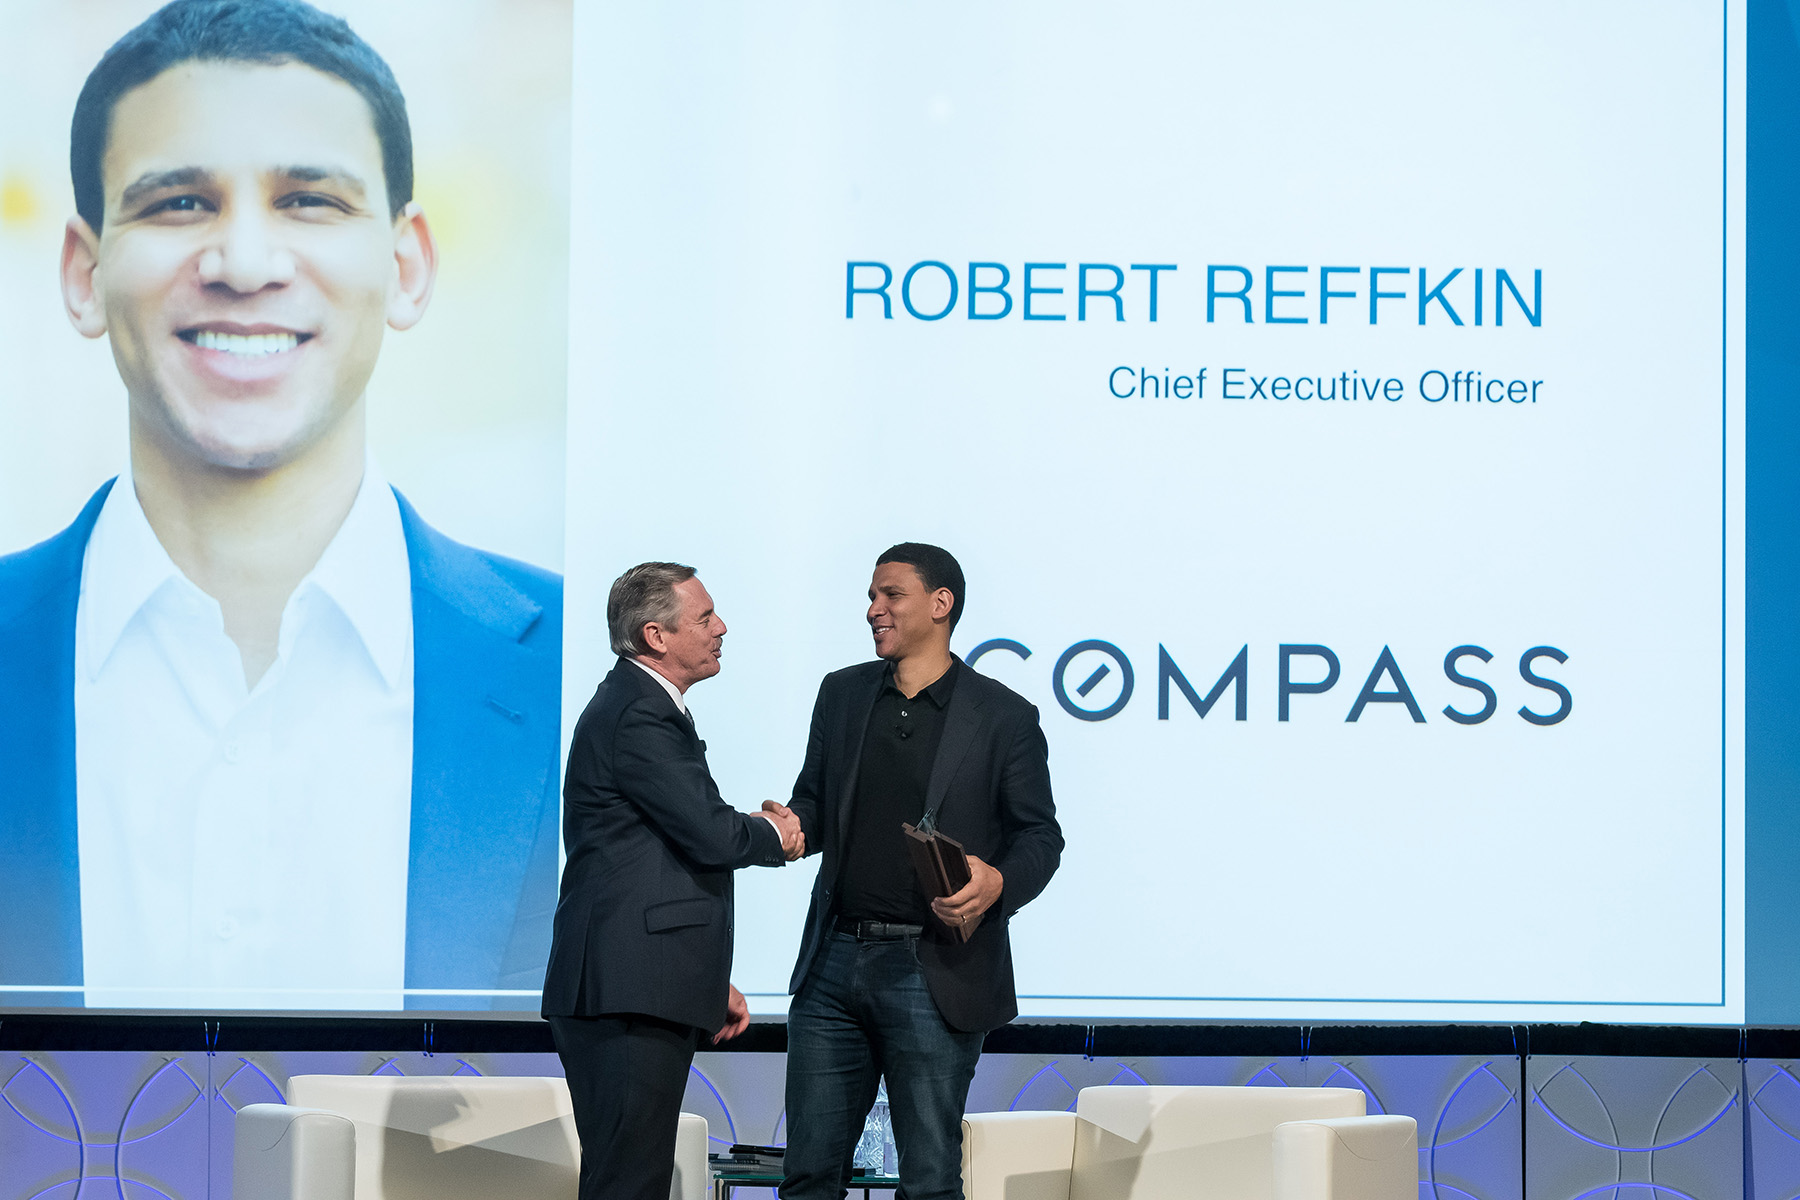 Stefan Swanepoel presents Robert Reffkin, CEO of Compass with 2019 Visionary Award.